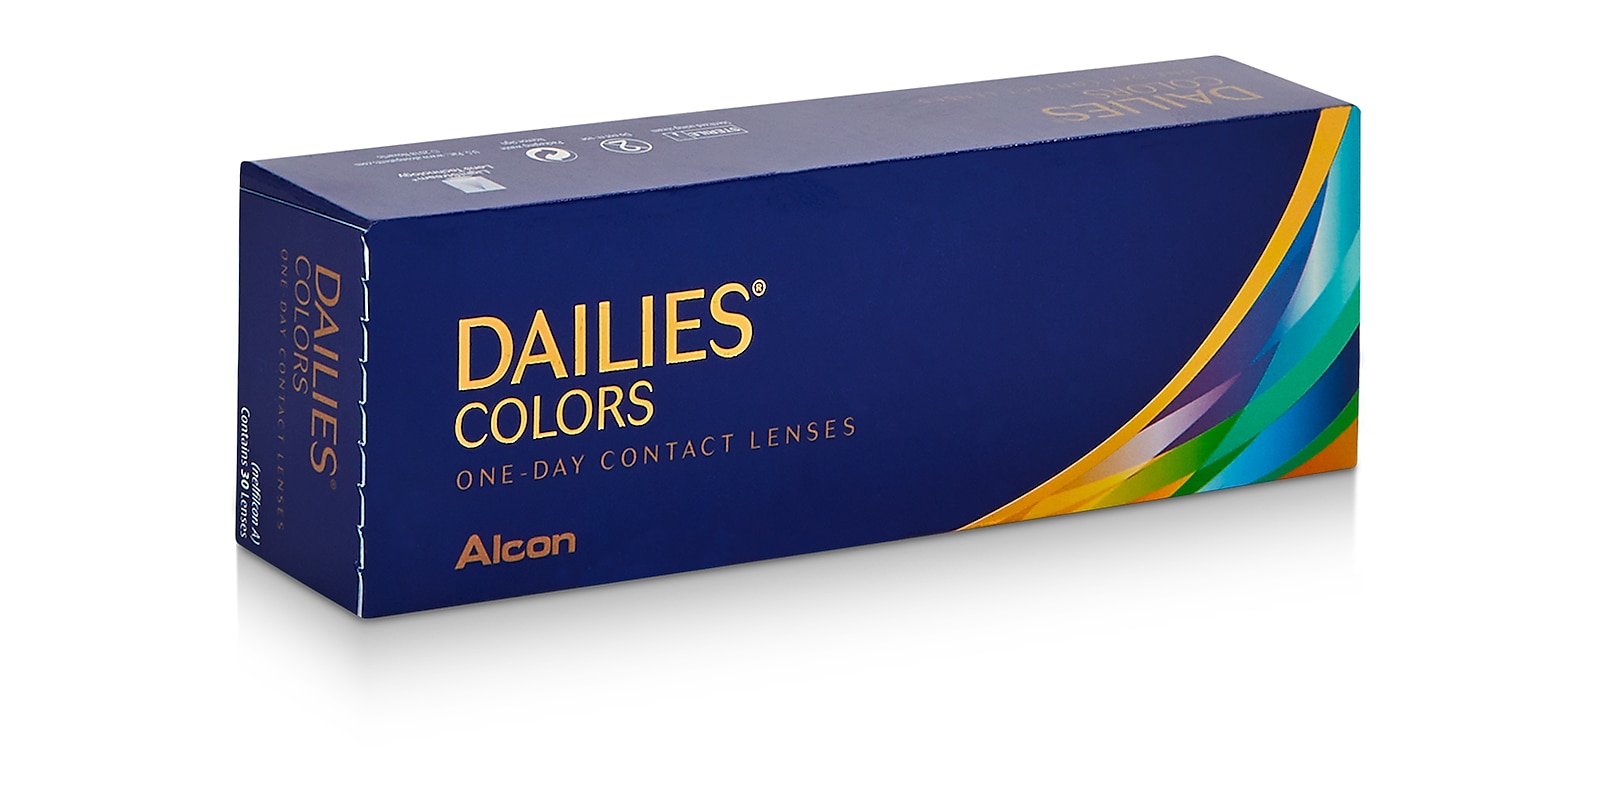 Dailies® Colors, 30 pack contact lenses